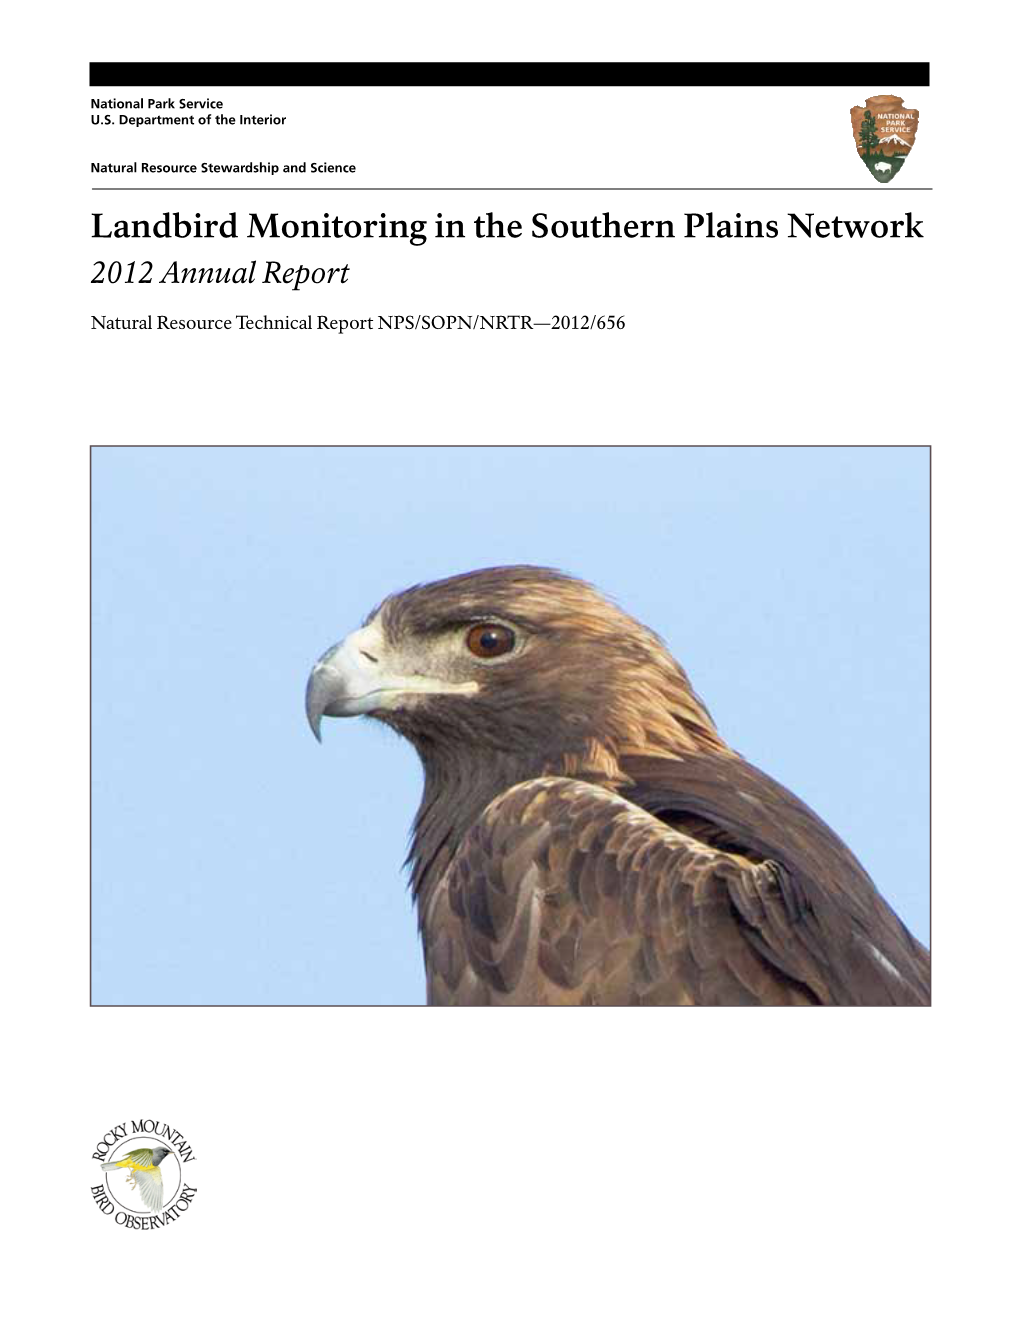 Landbird Monitoring in the Southern Plains Network 2012 Annual Report